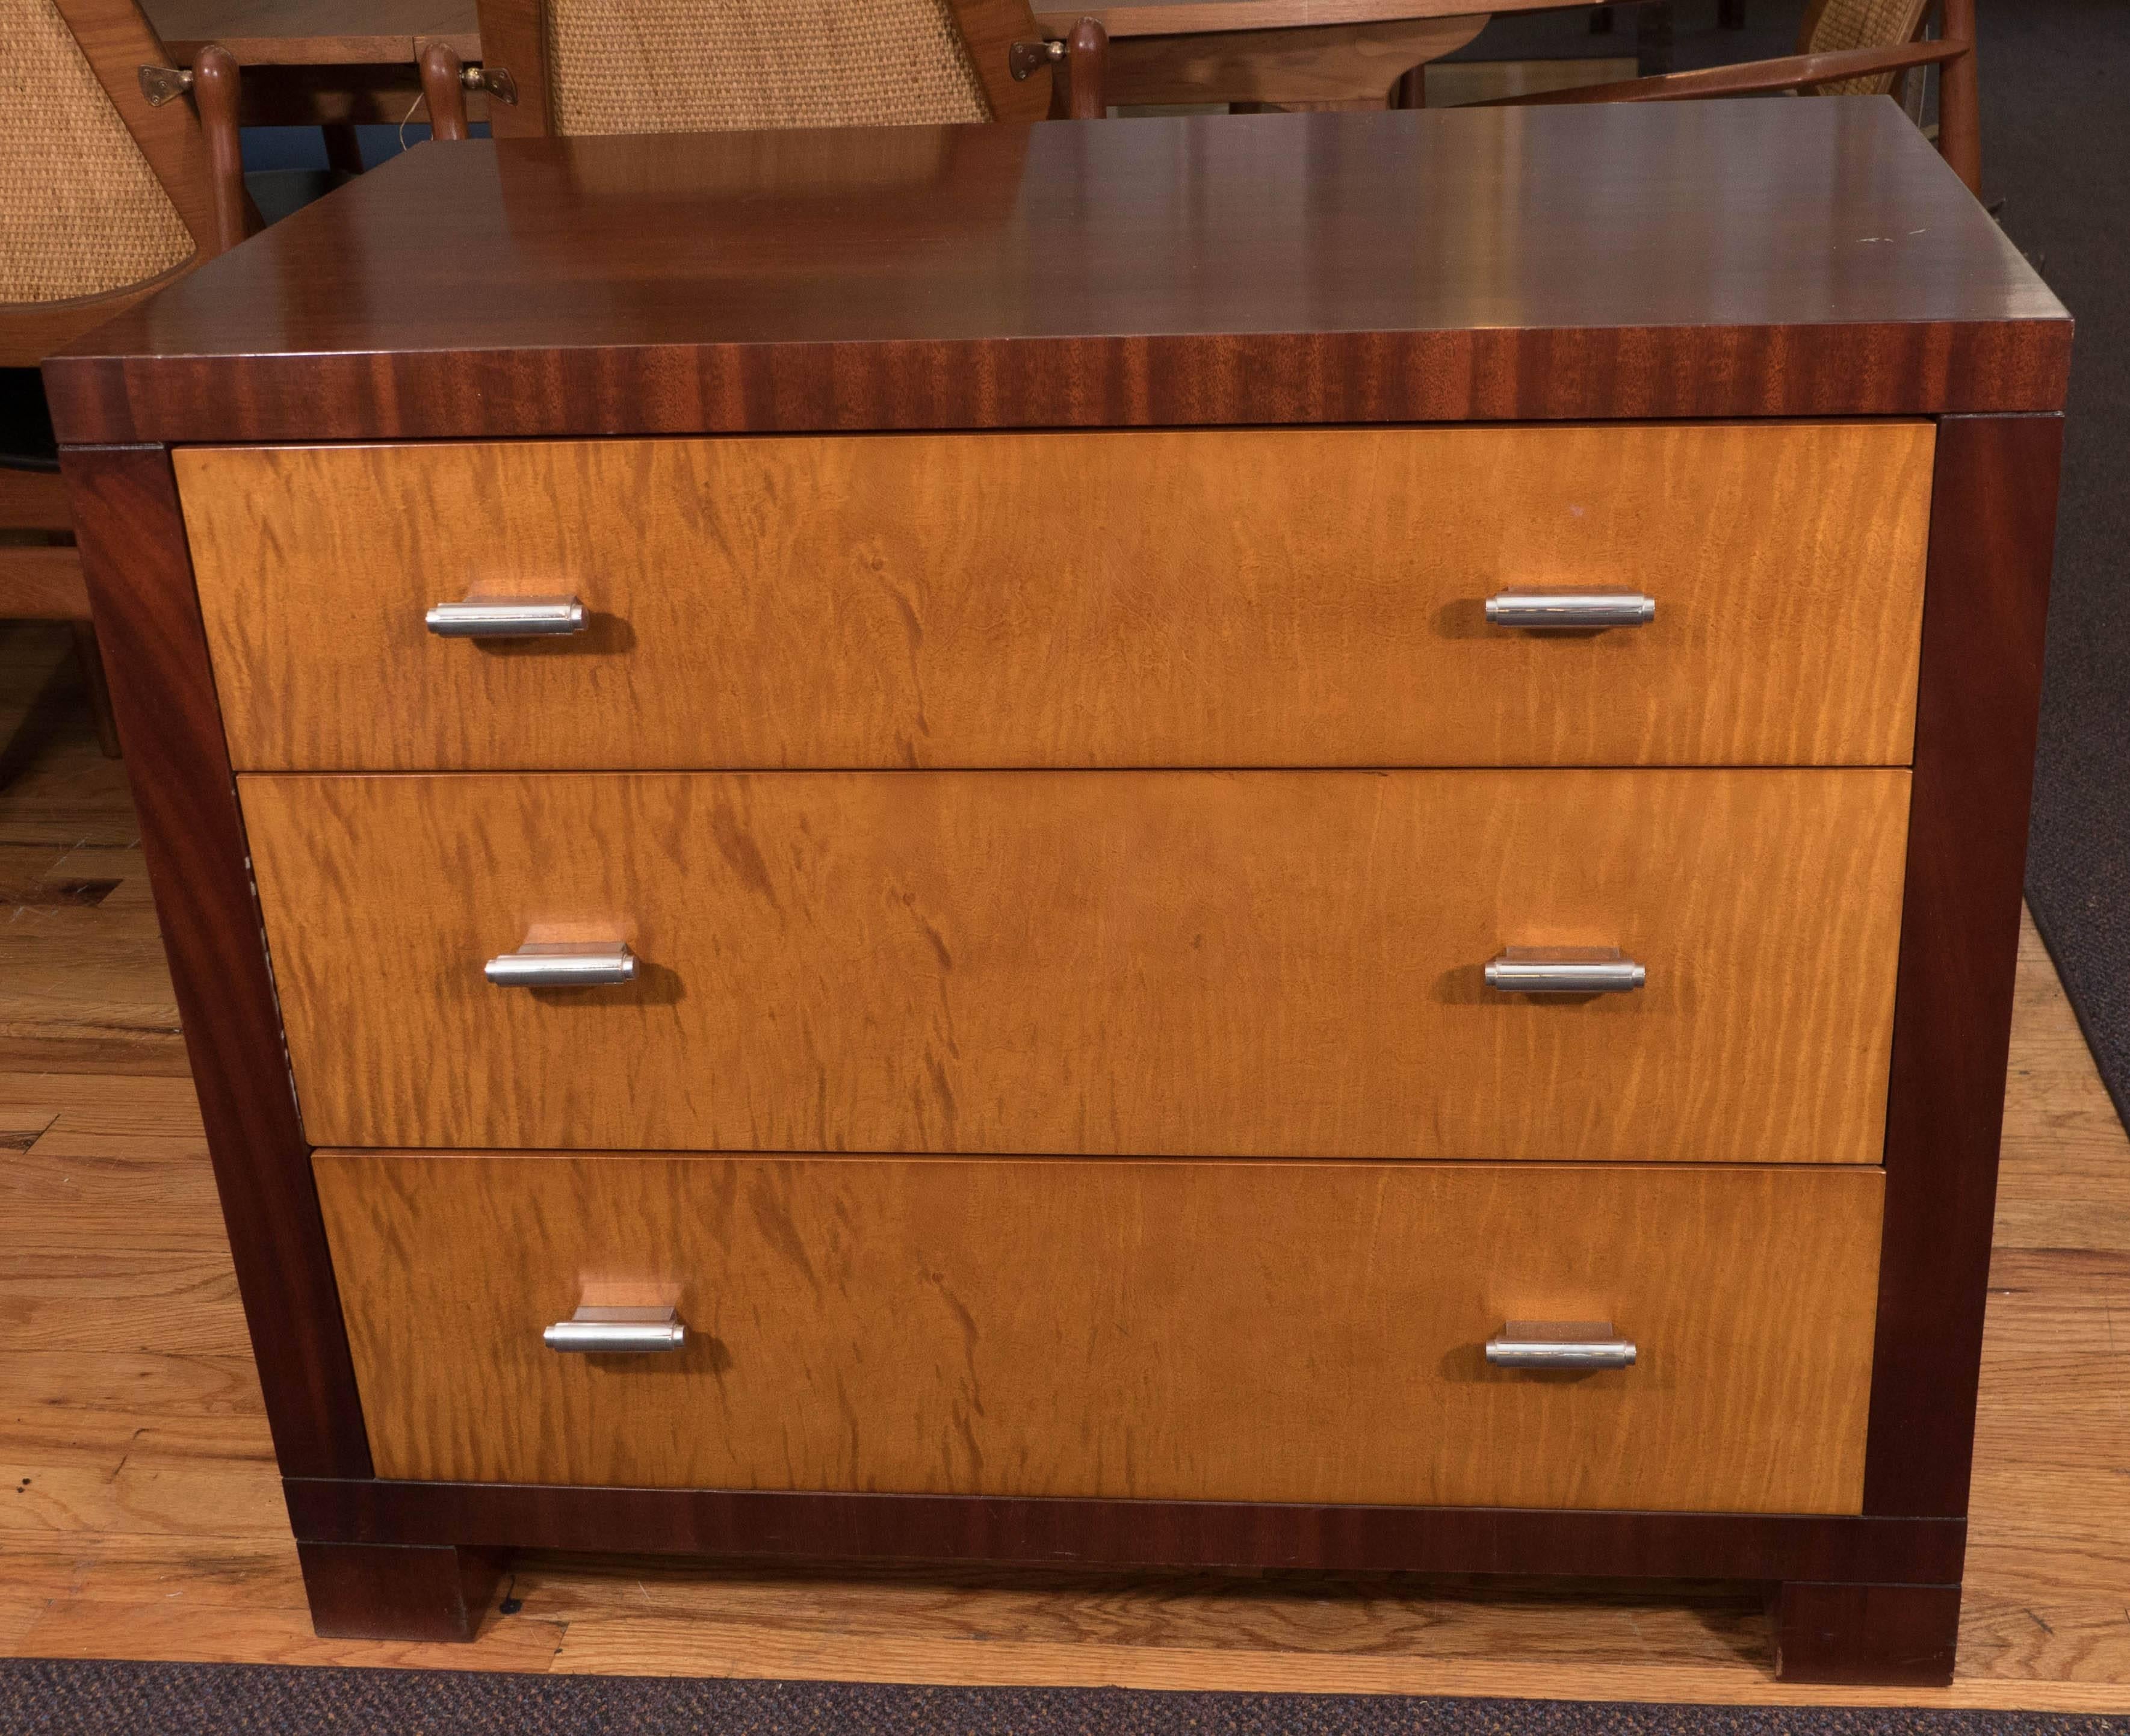 This dresser and commode by John Widdicomb comes with three drawers, each with bright sycamore fronts and two cylindrical pulls in nickel, against a linear rich mahogany frame, on block feet. Markings include makers label [JW/John Widdicomb] to the